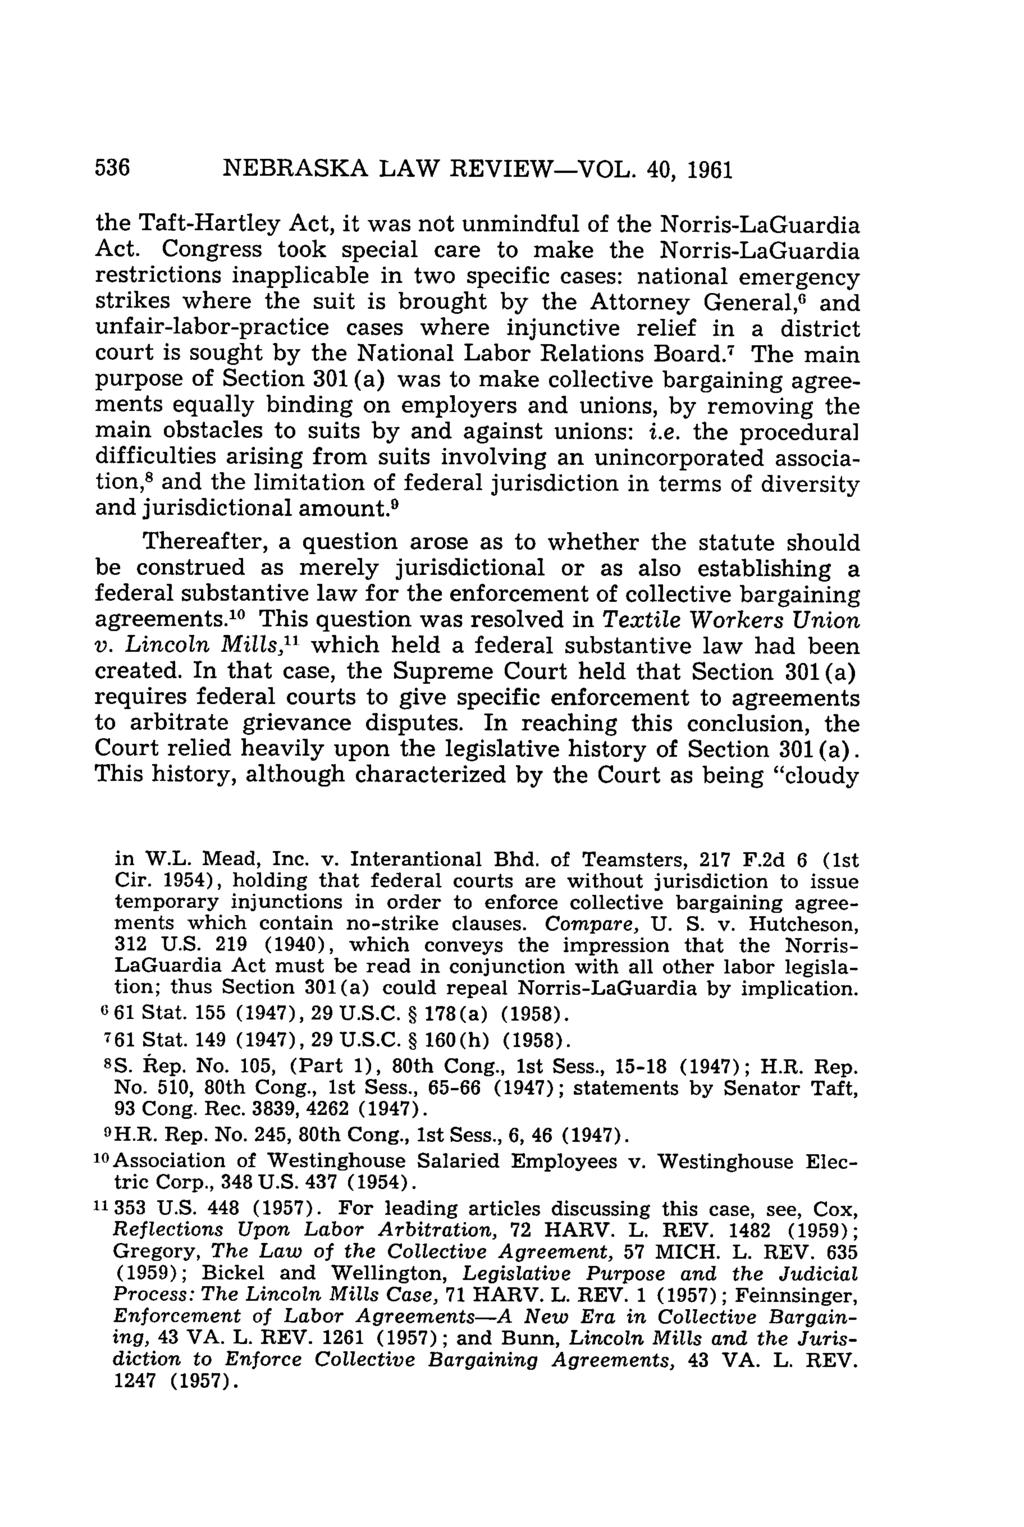 NEBRASKA LAW REVIEW-VOL. 40, 1961 the Taft-Hartley Act, it was not unmindful of the Norris-LaGuardia Act.